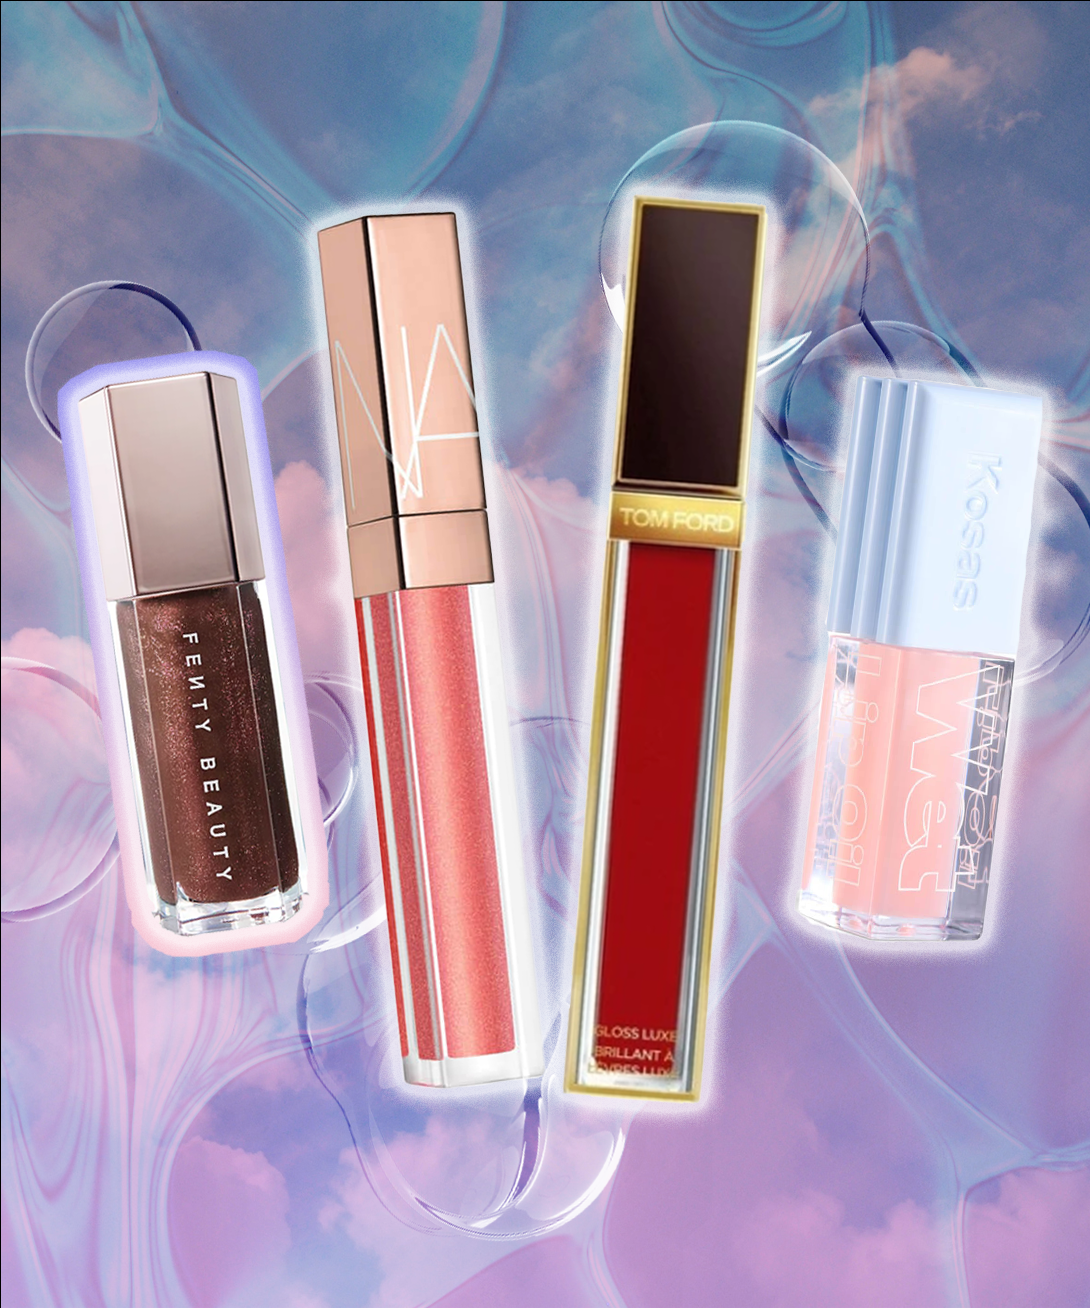 15 Best Lip Glosses, According to Editors in 2023